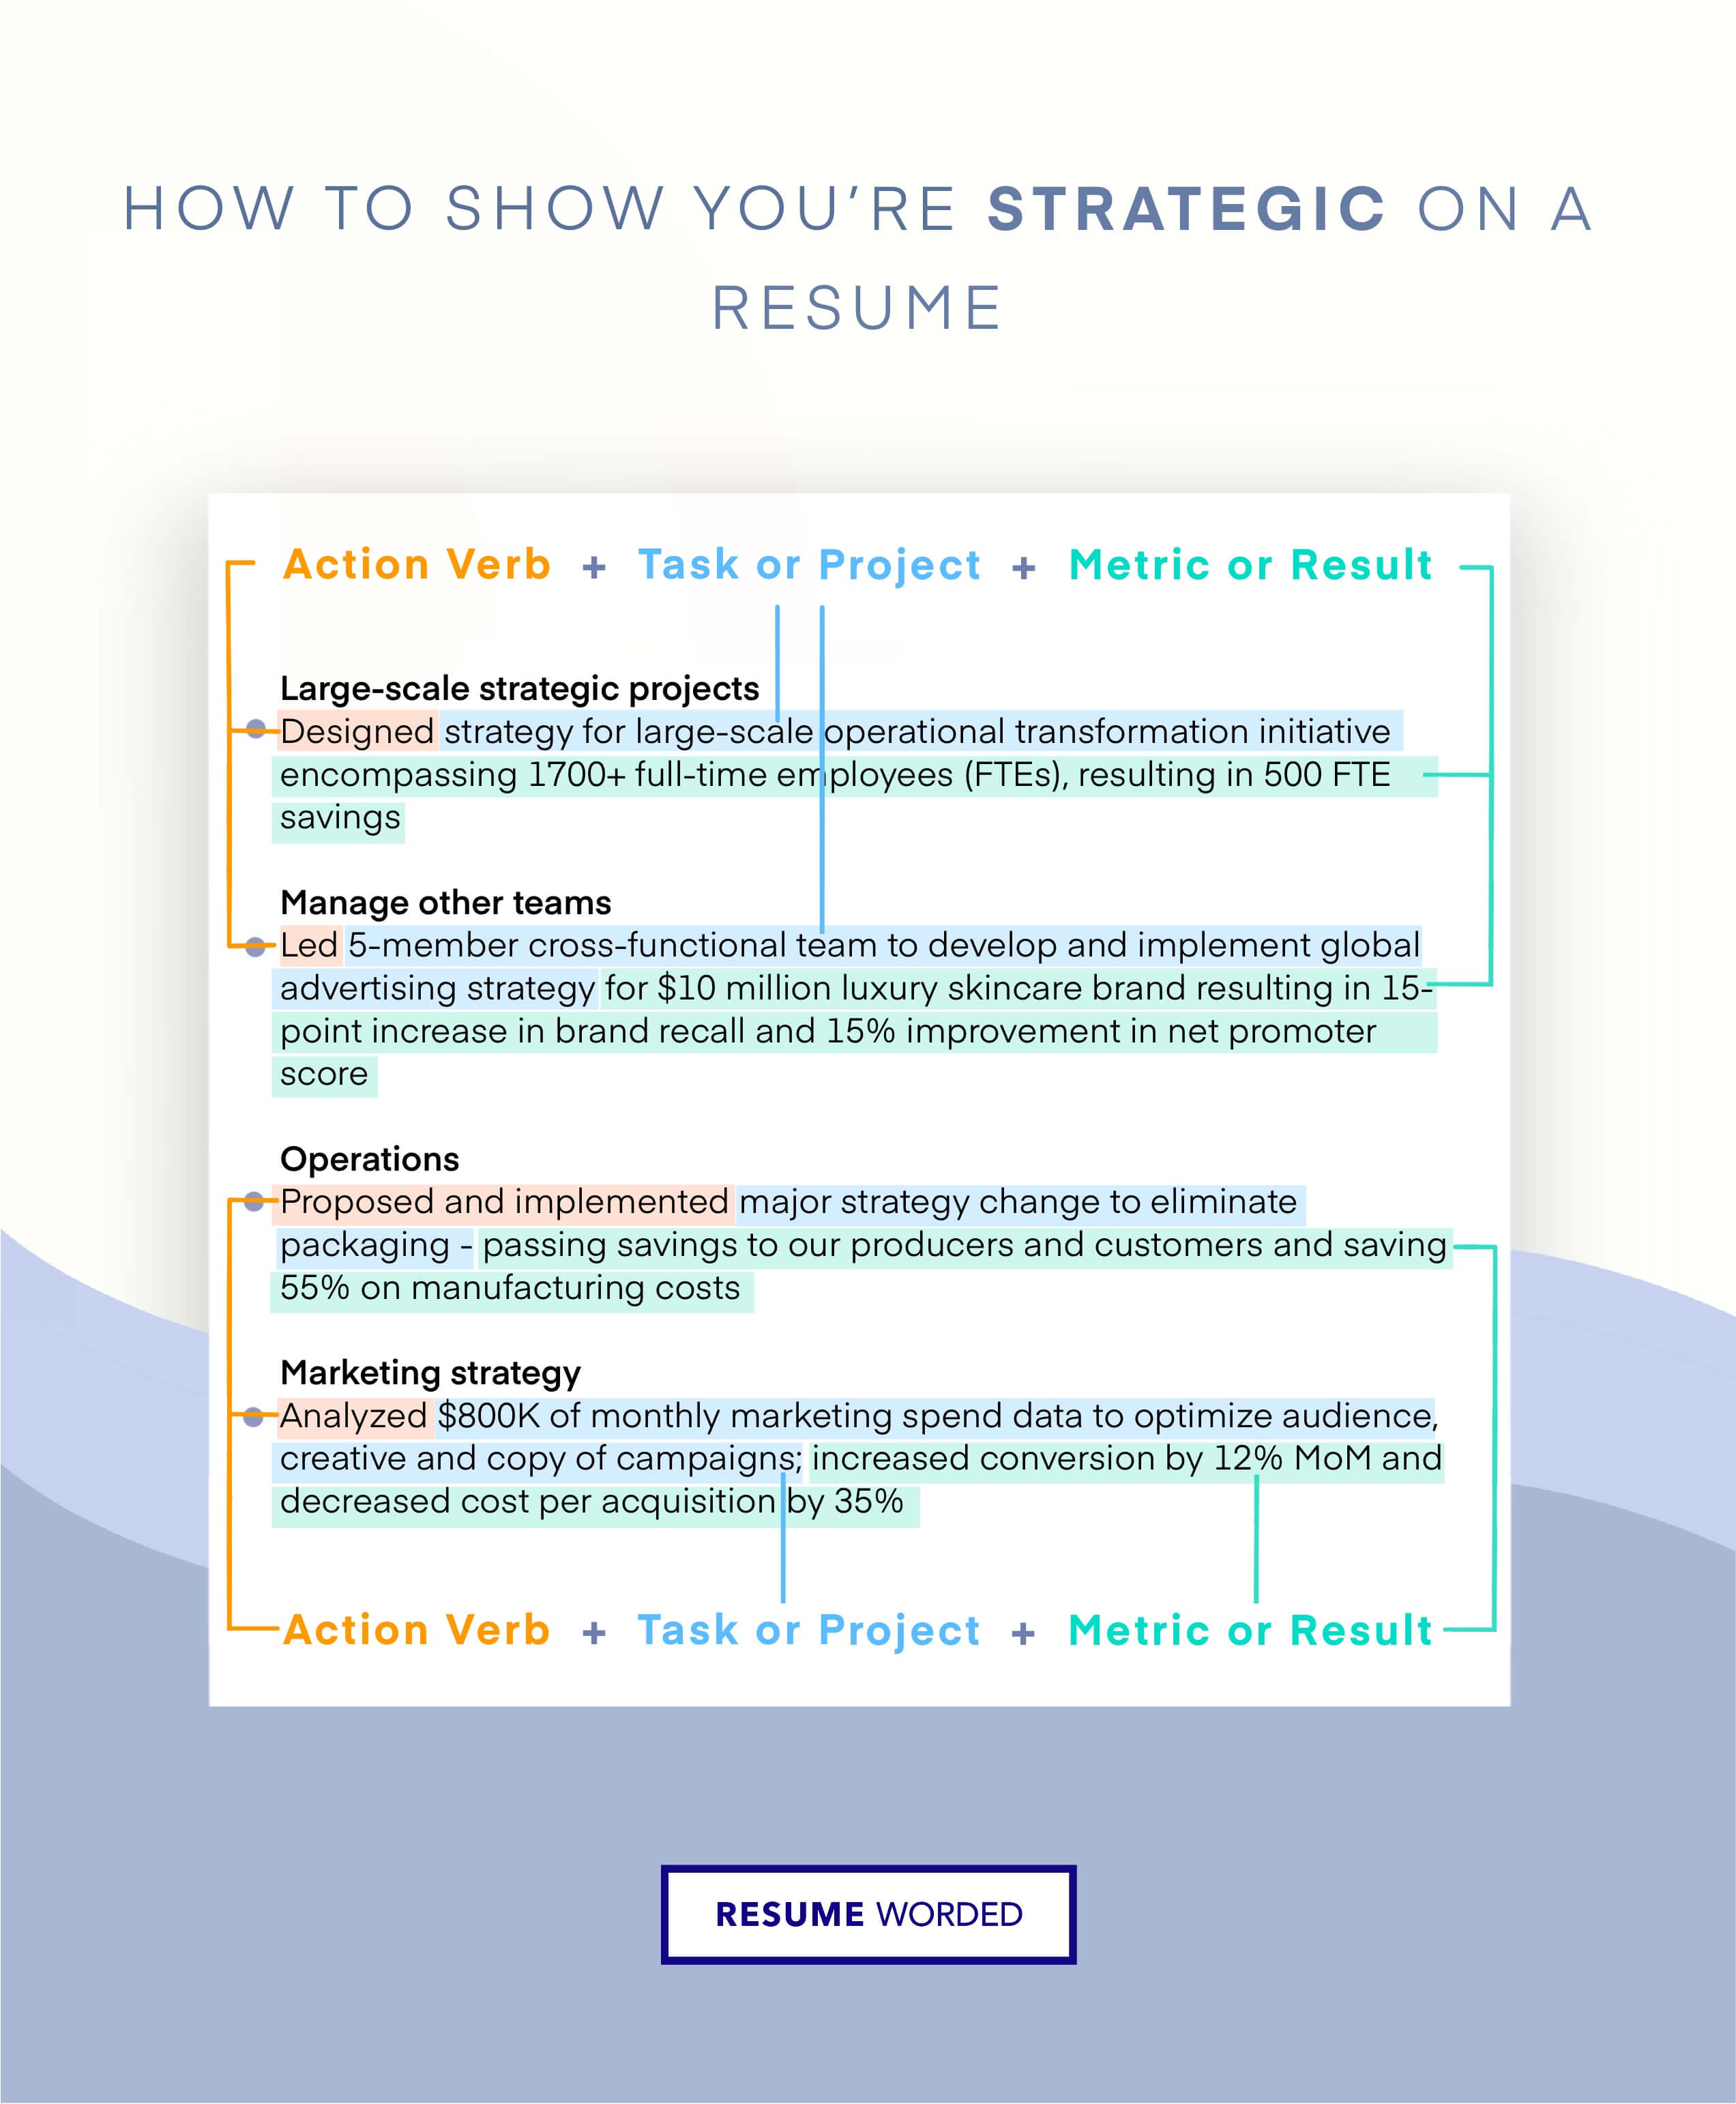 Showcase your strategic ability - Category Manager CV